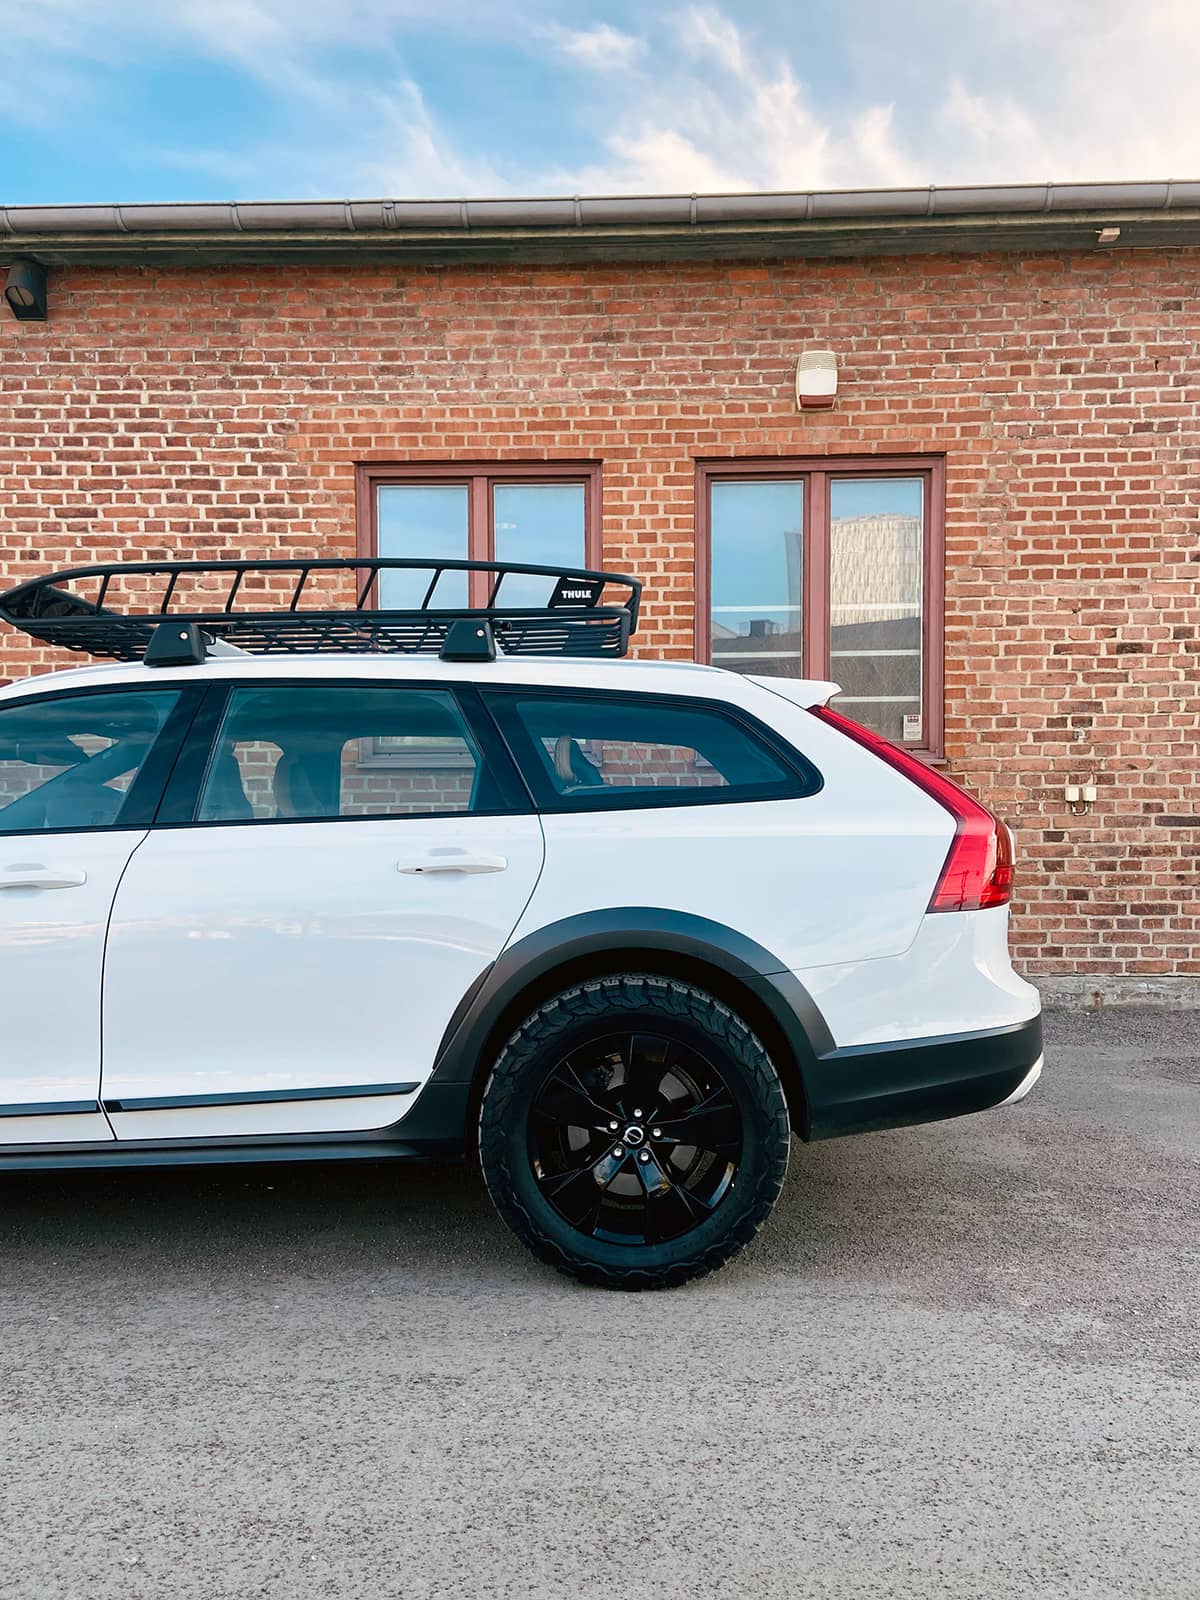 2018 Volvo V90 Cross Country Rear suspension lifted 20 mm with BSR spacer